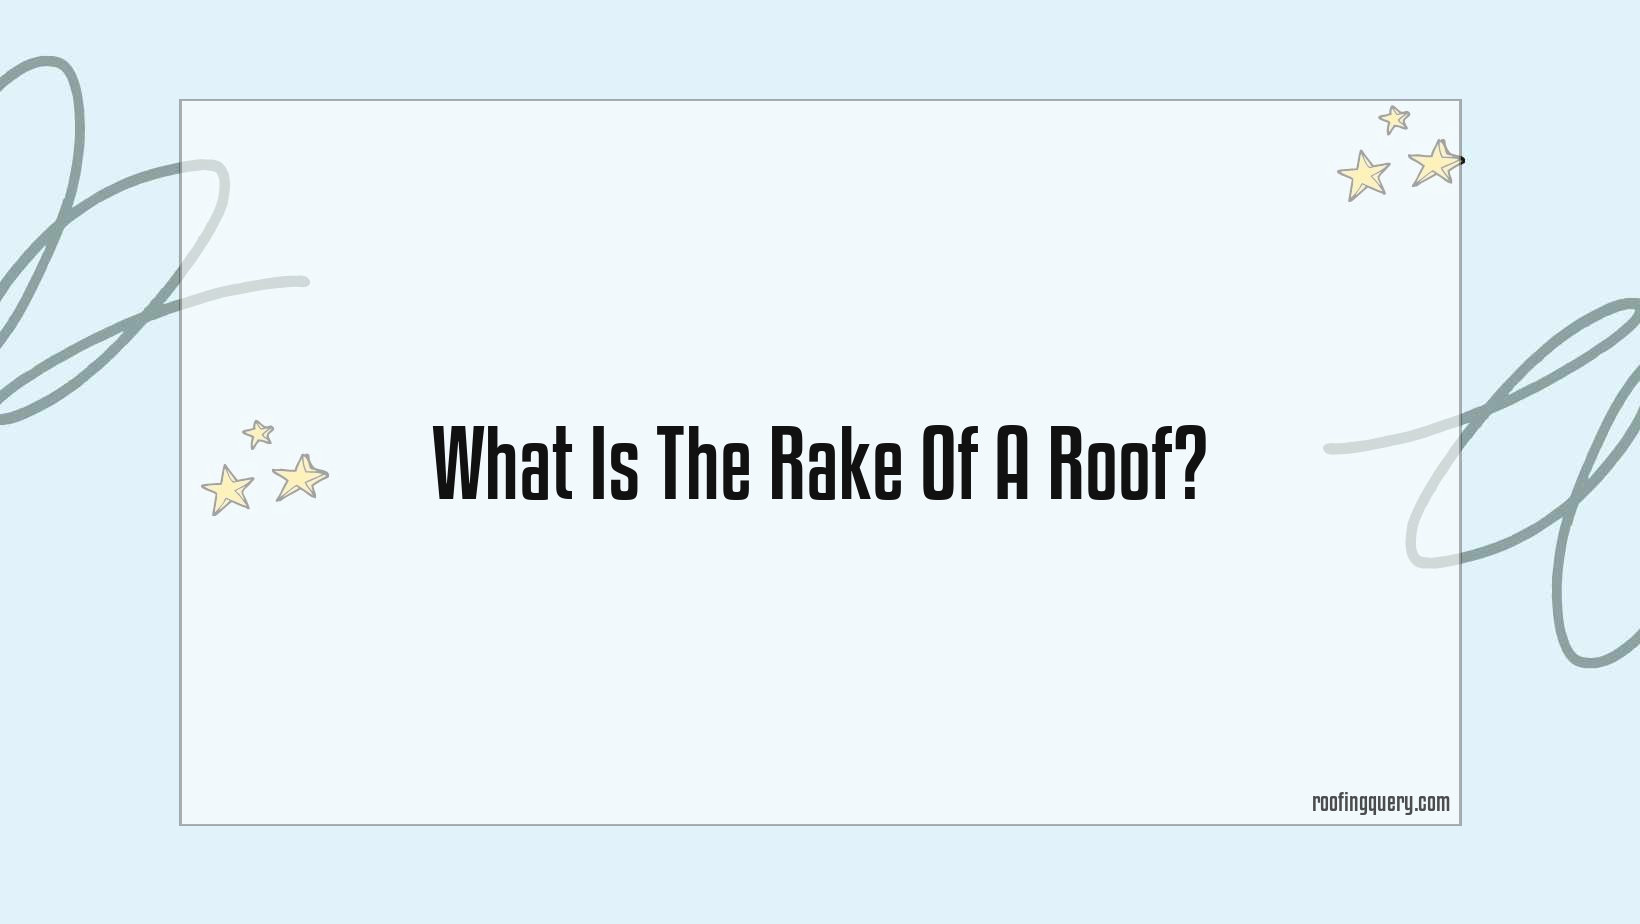 What Is The Rake Of A Roof